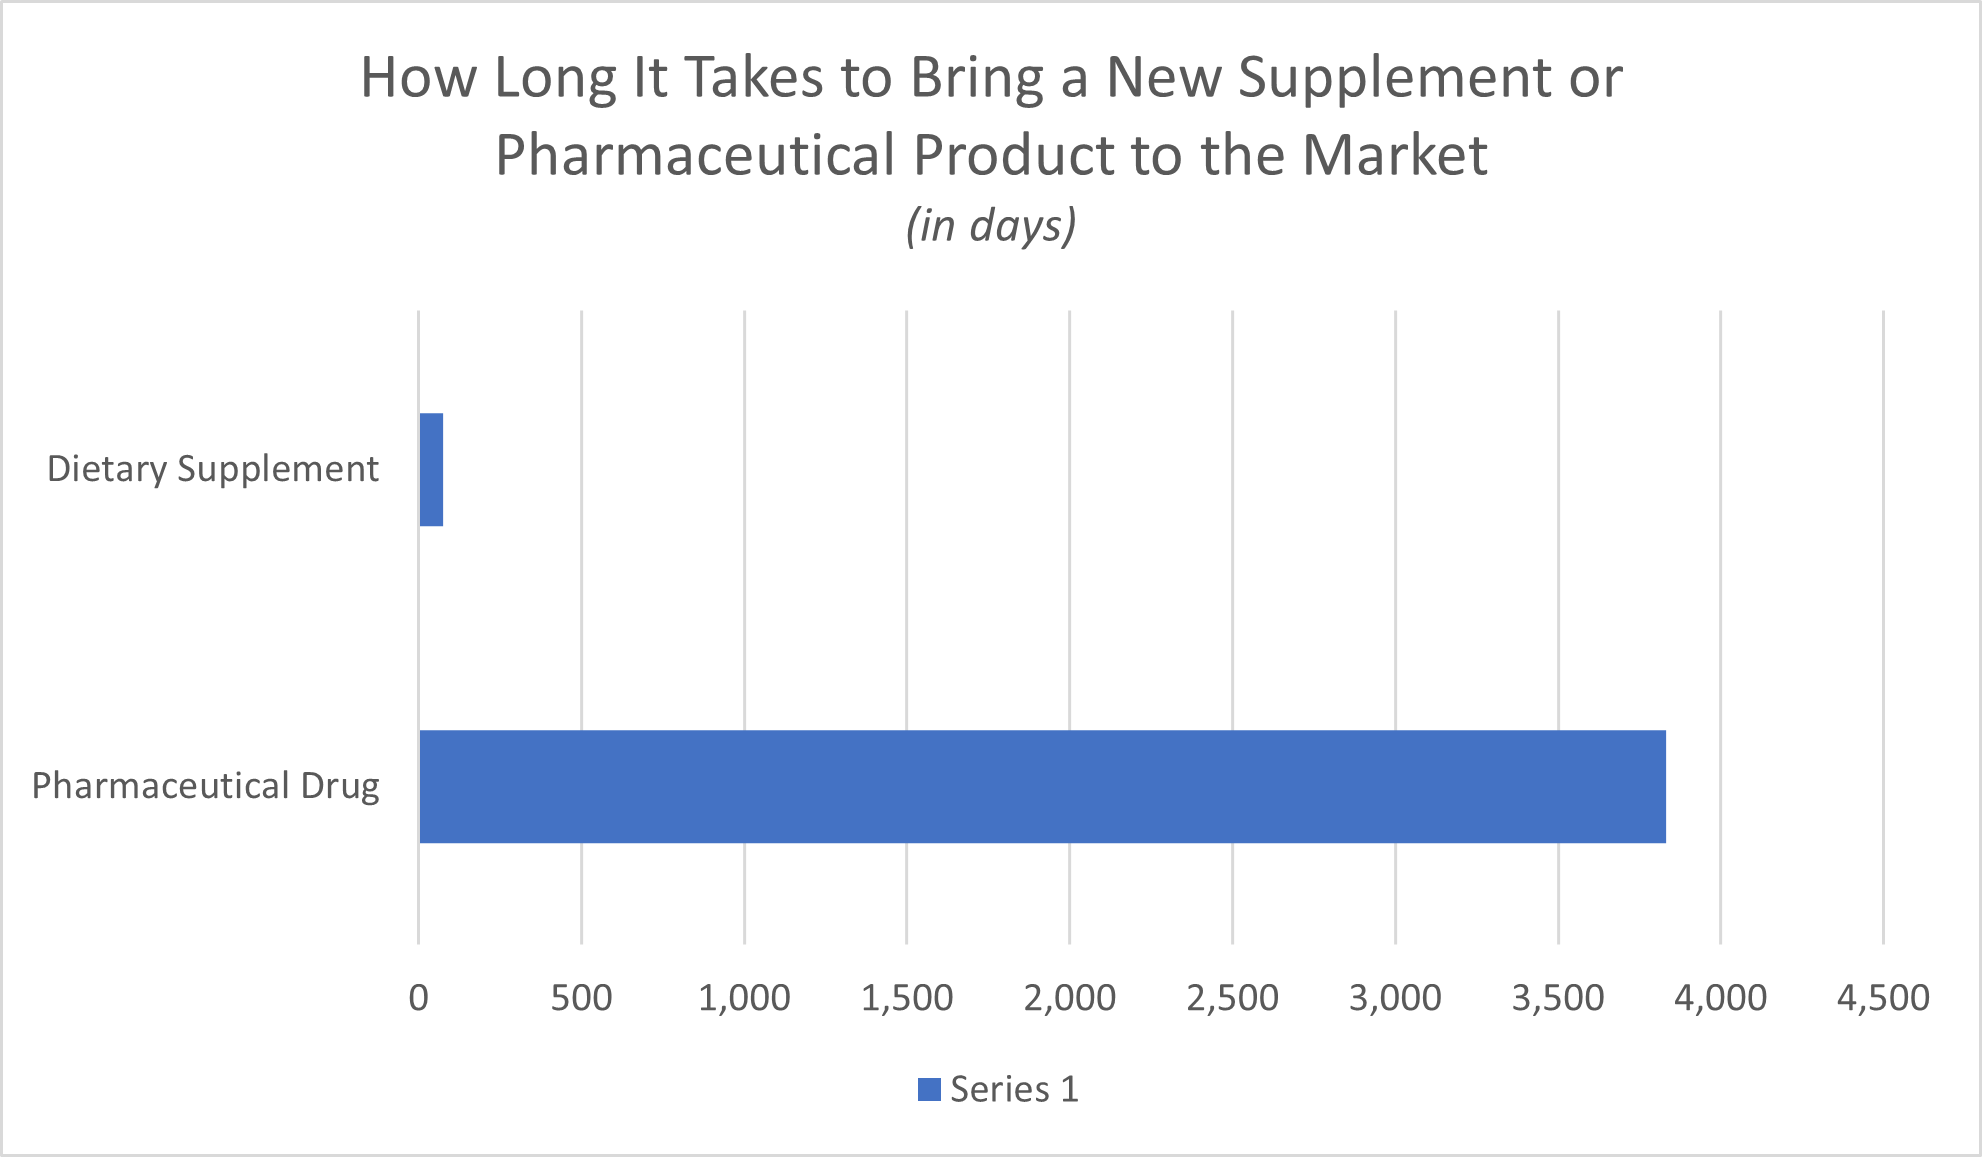 How Long It Takes to Bring a New Supplement or Pharmaceutical Product to the Market (in days)